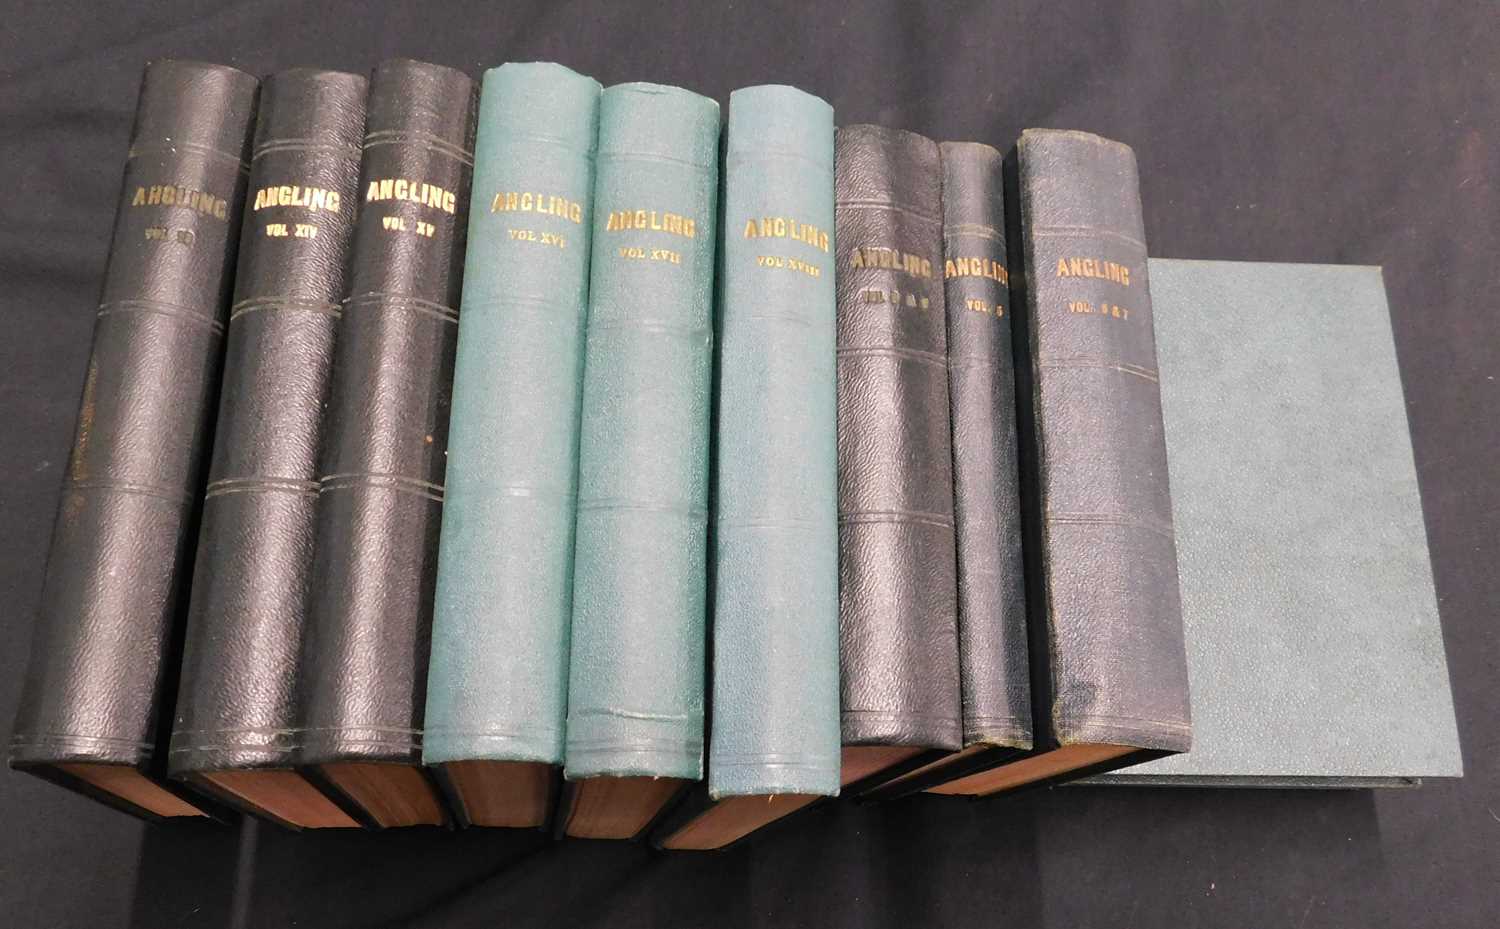 ANGLING, A QUARTERLY FOR EVERY ANGLER, 1938-47, 1950-55, vols 3-9, 13-18 in 11, variant cloth